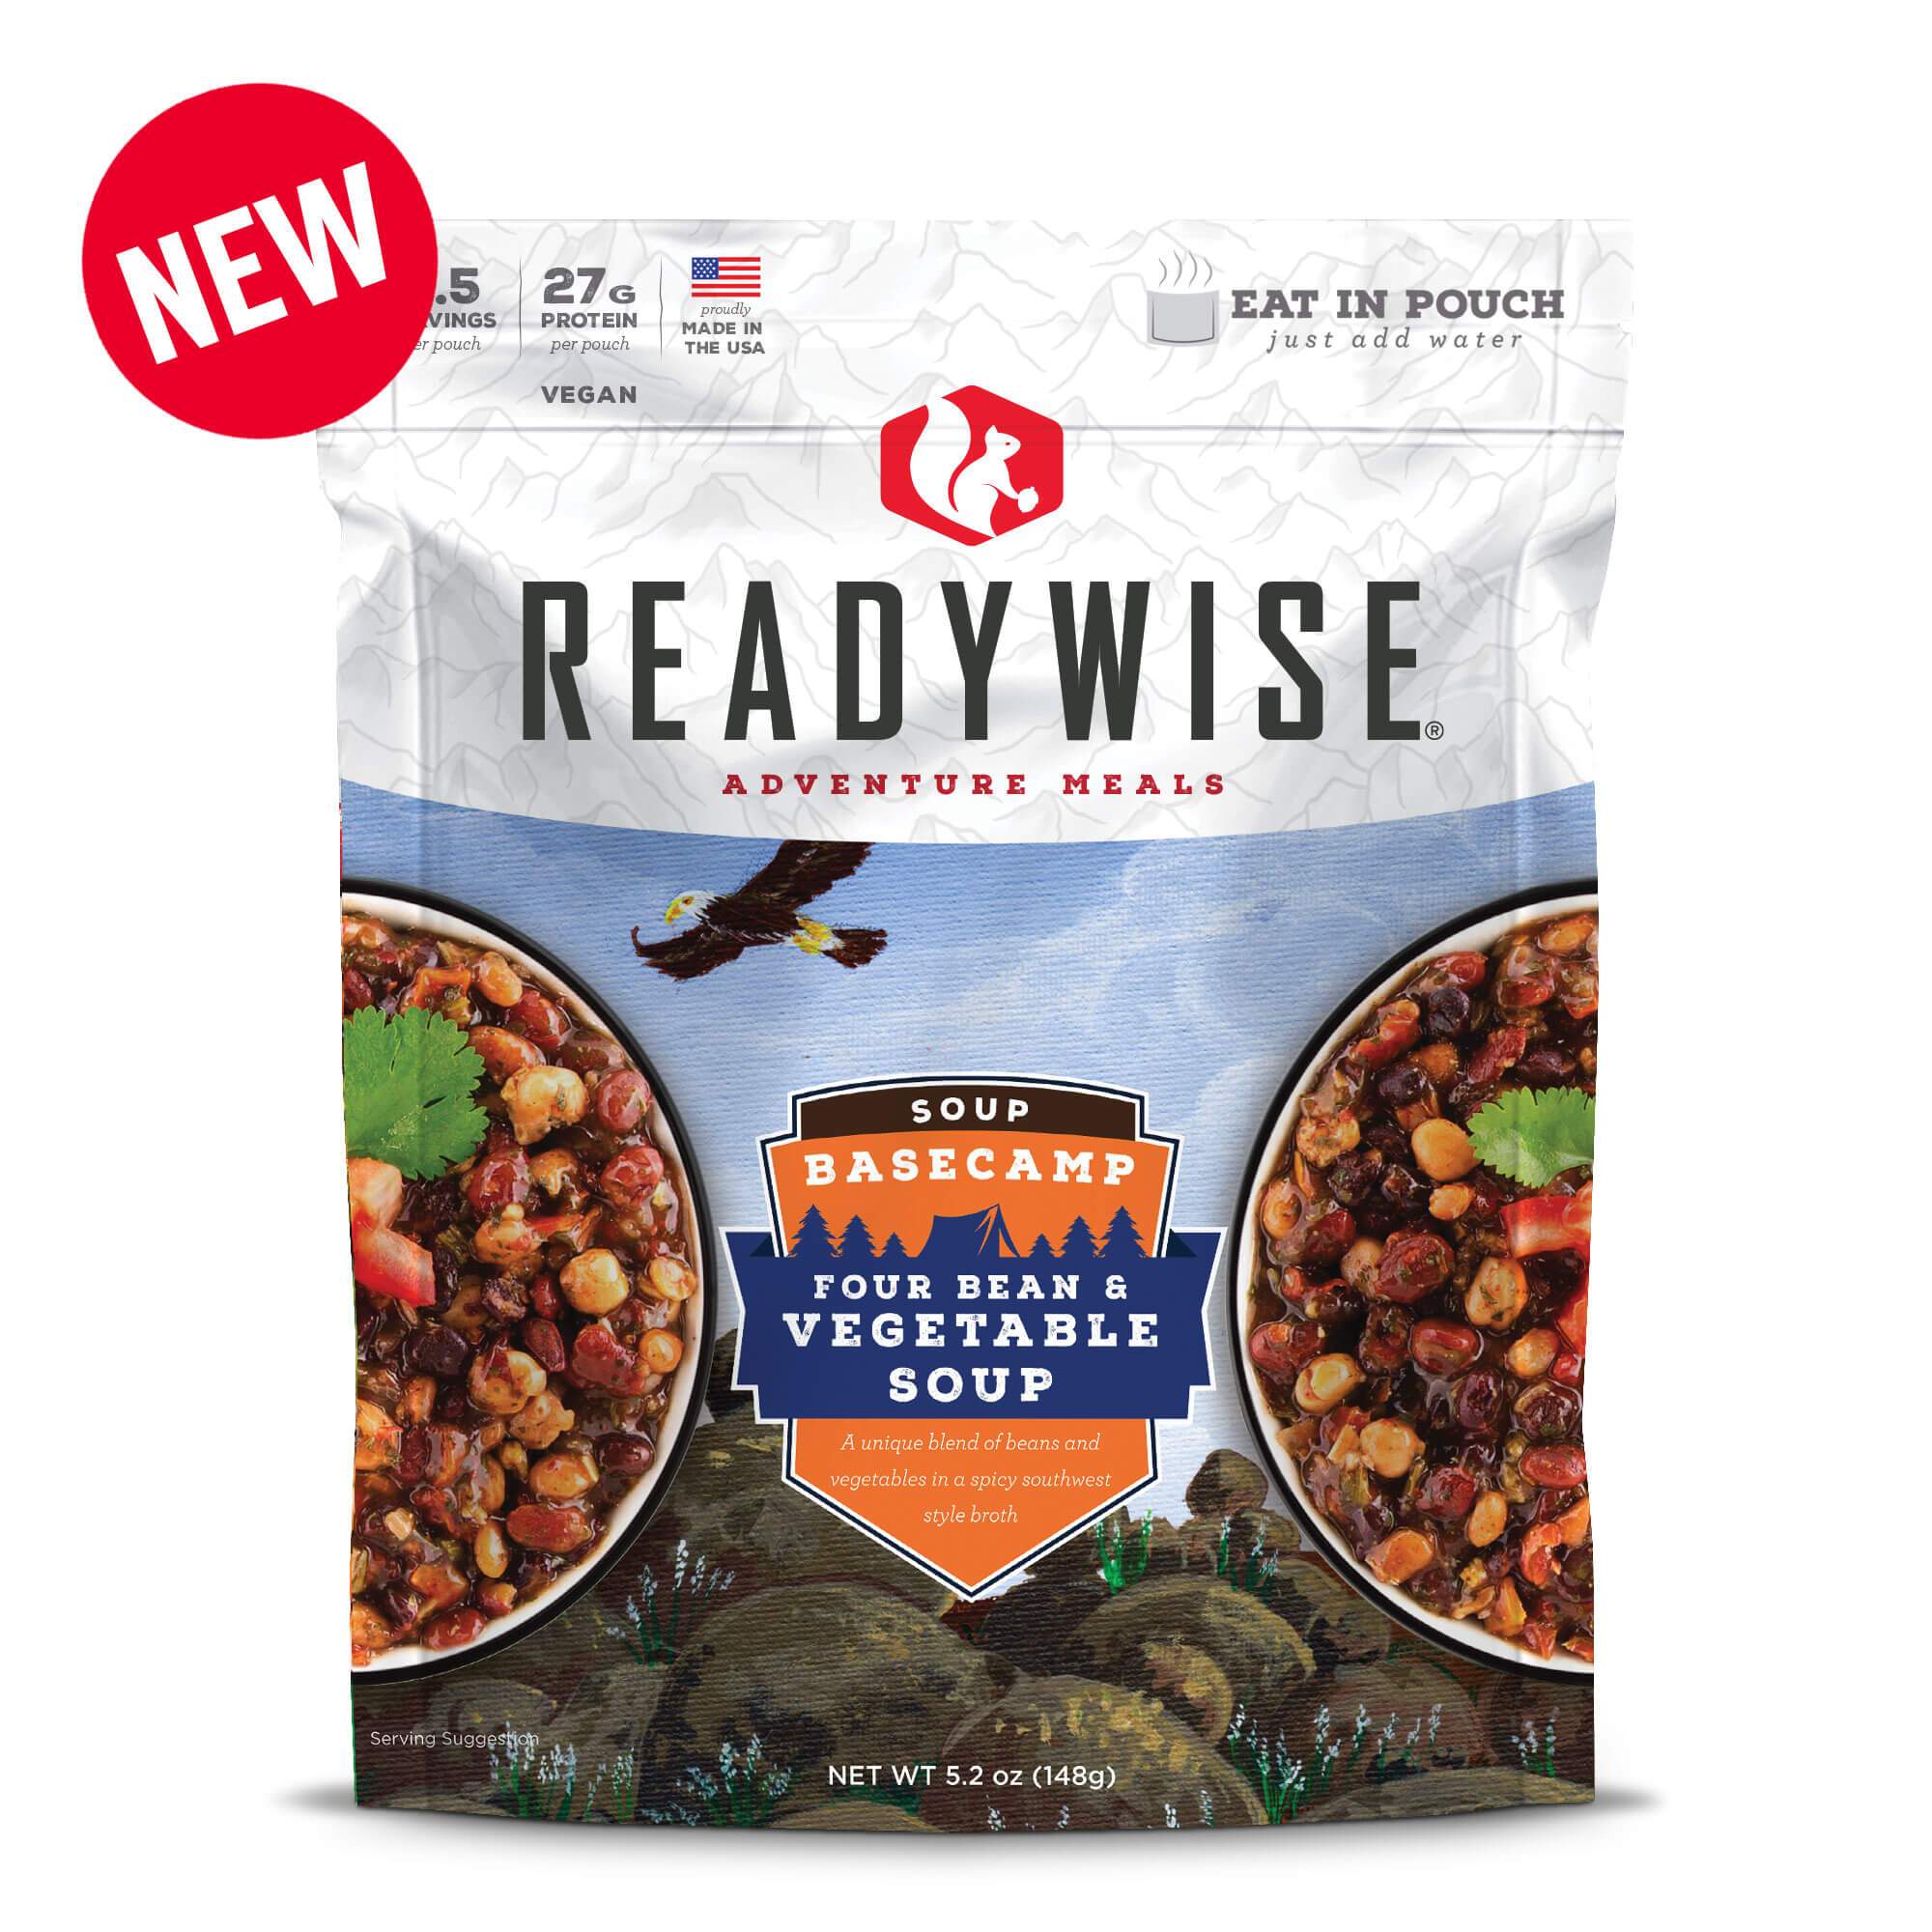 A bag of ReadyWise (formerly Wise Food Storage) Hunting Food Calorie Booster Emergency Food Bucket - (SHIPS IN 1-2 WEEKS) chile relleno soup.